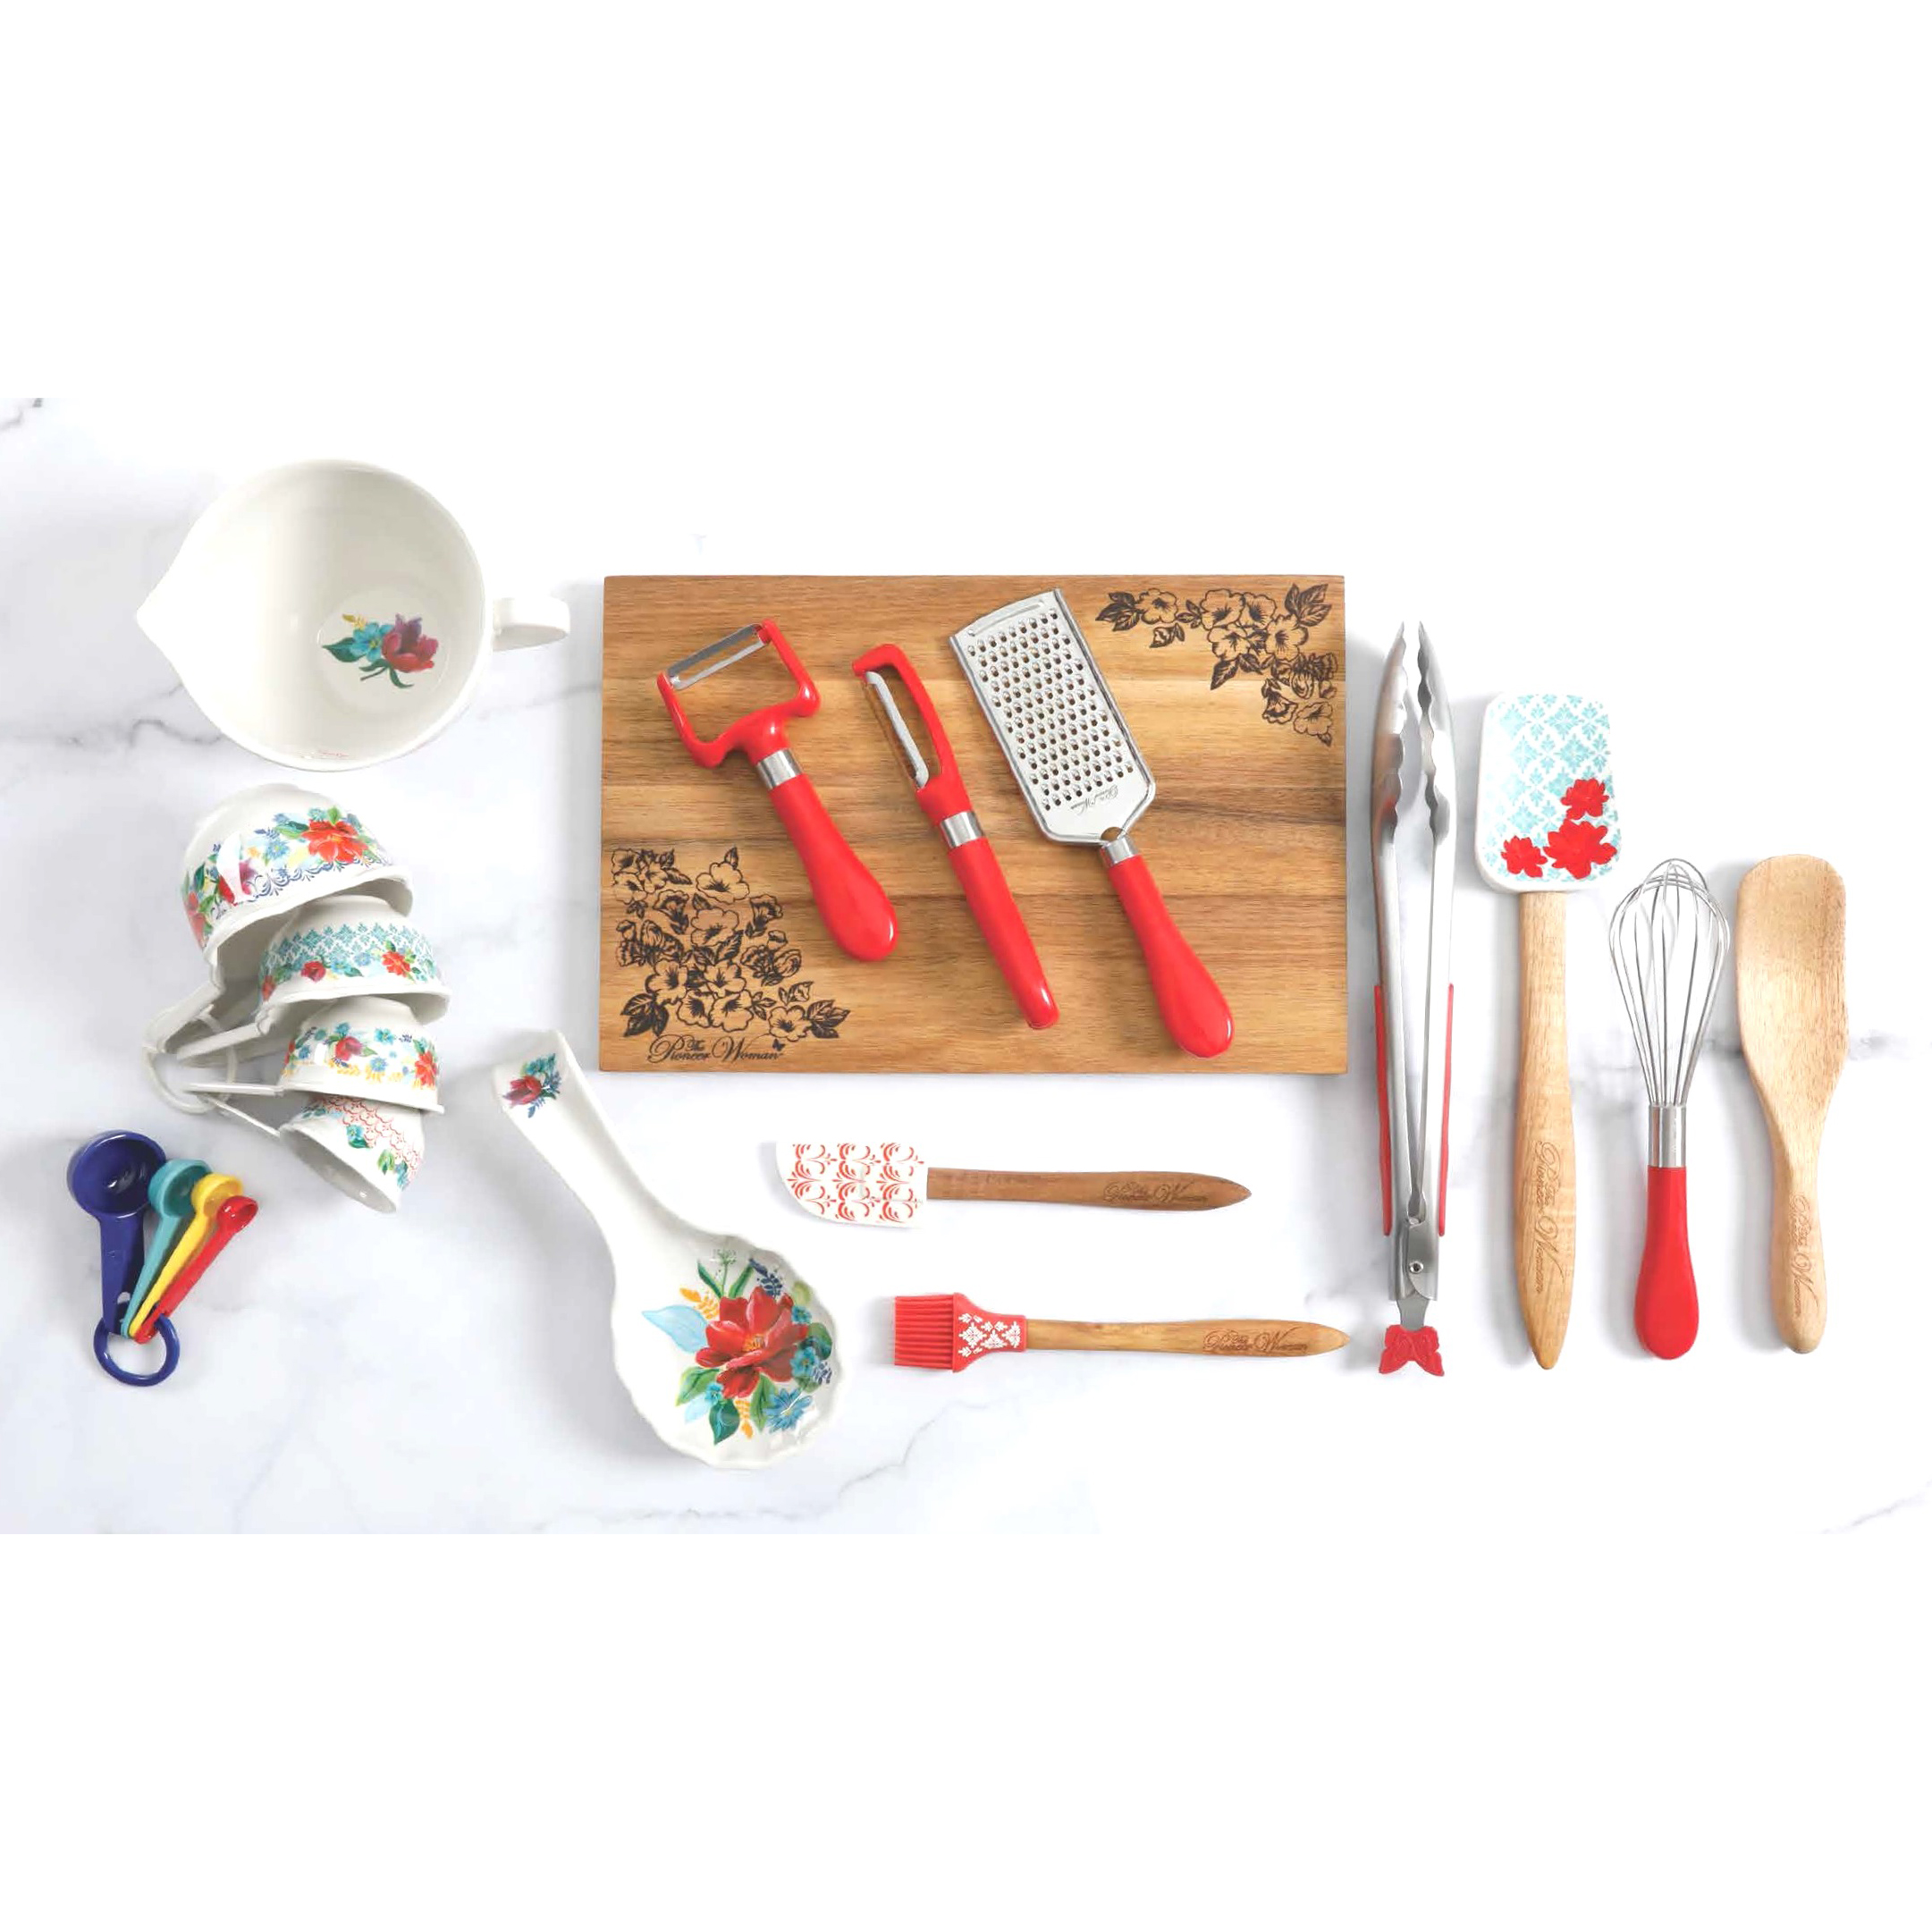 The Pioneer Woman Spring Bouquet 20-Piece Gadget Set - image 1 of 11